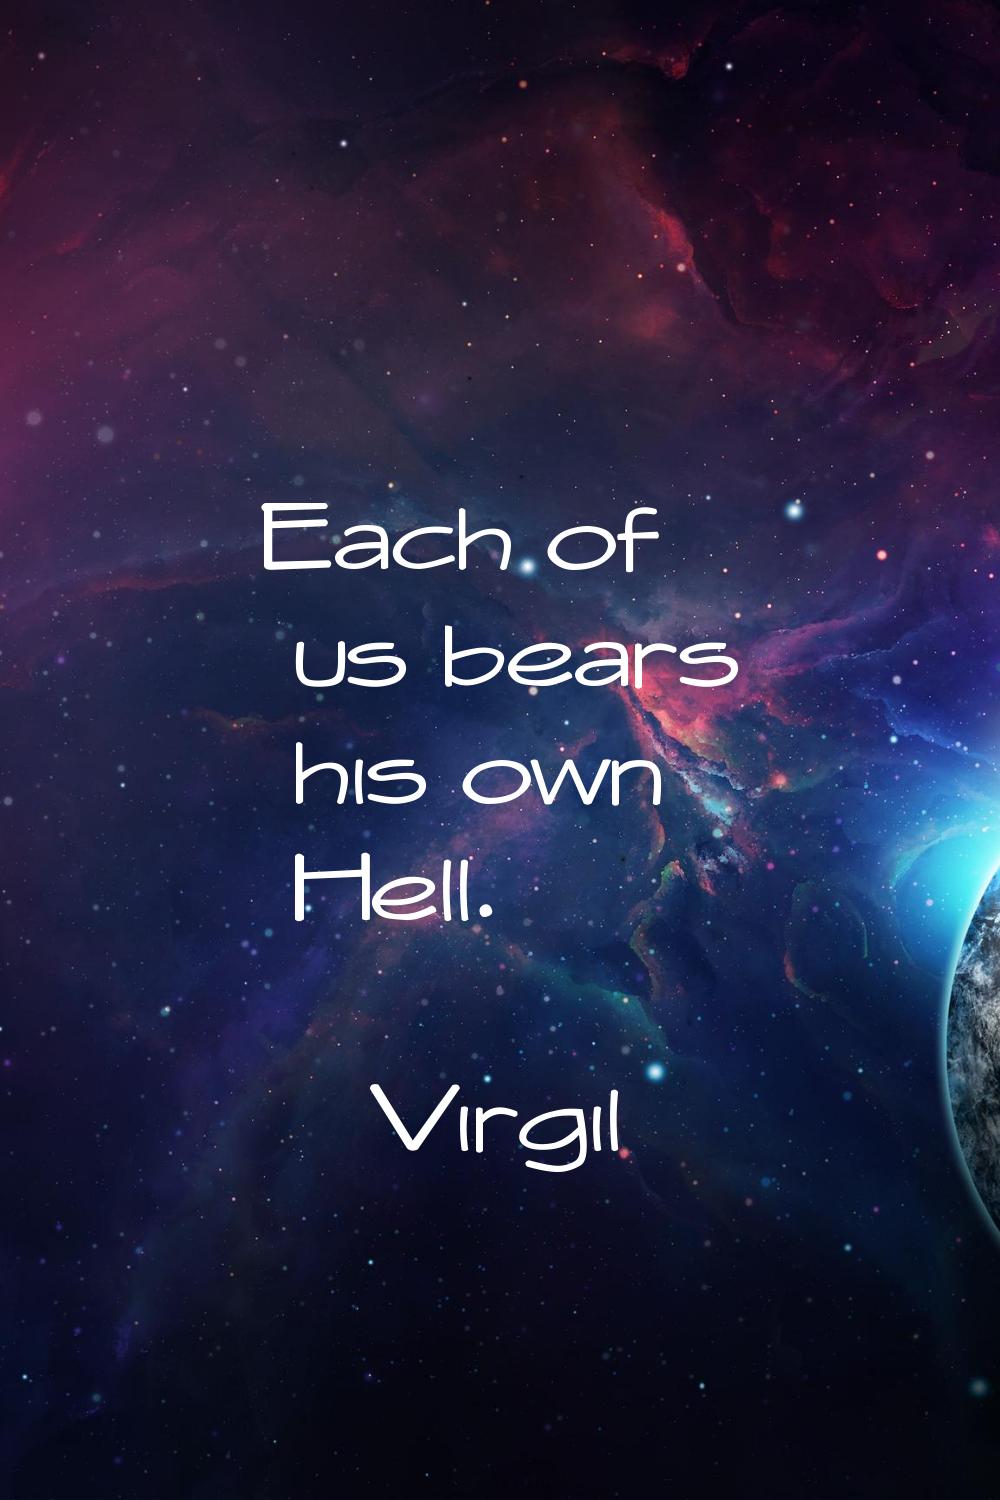 Each of us bears his own Hell.